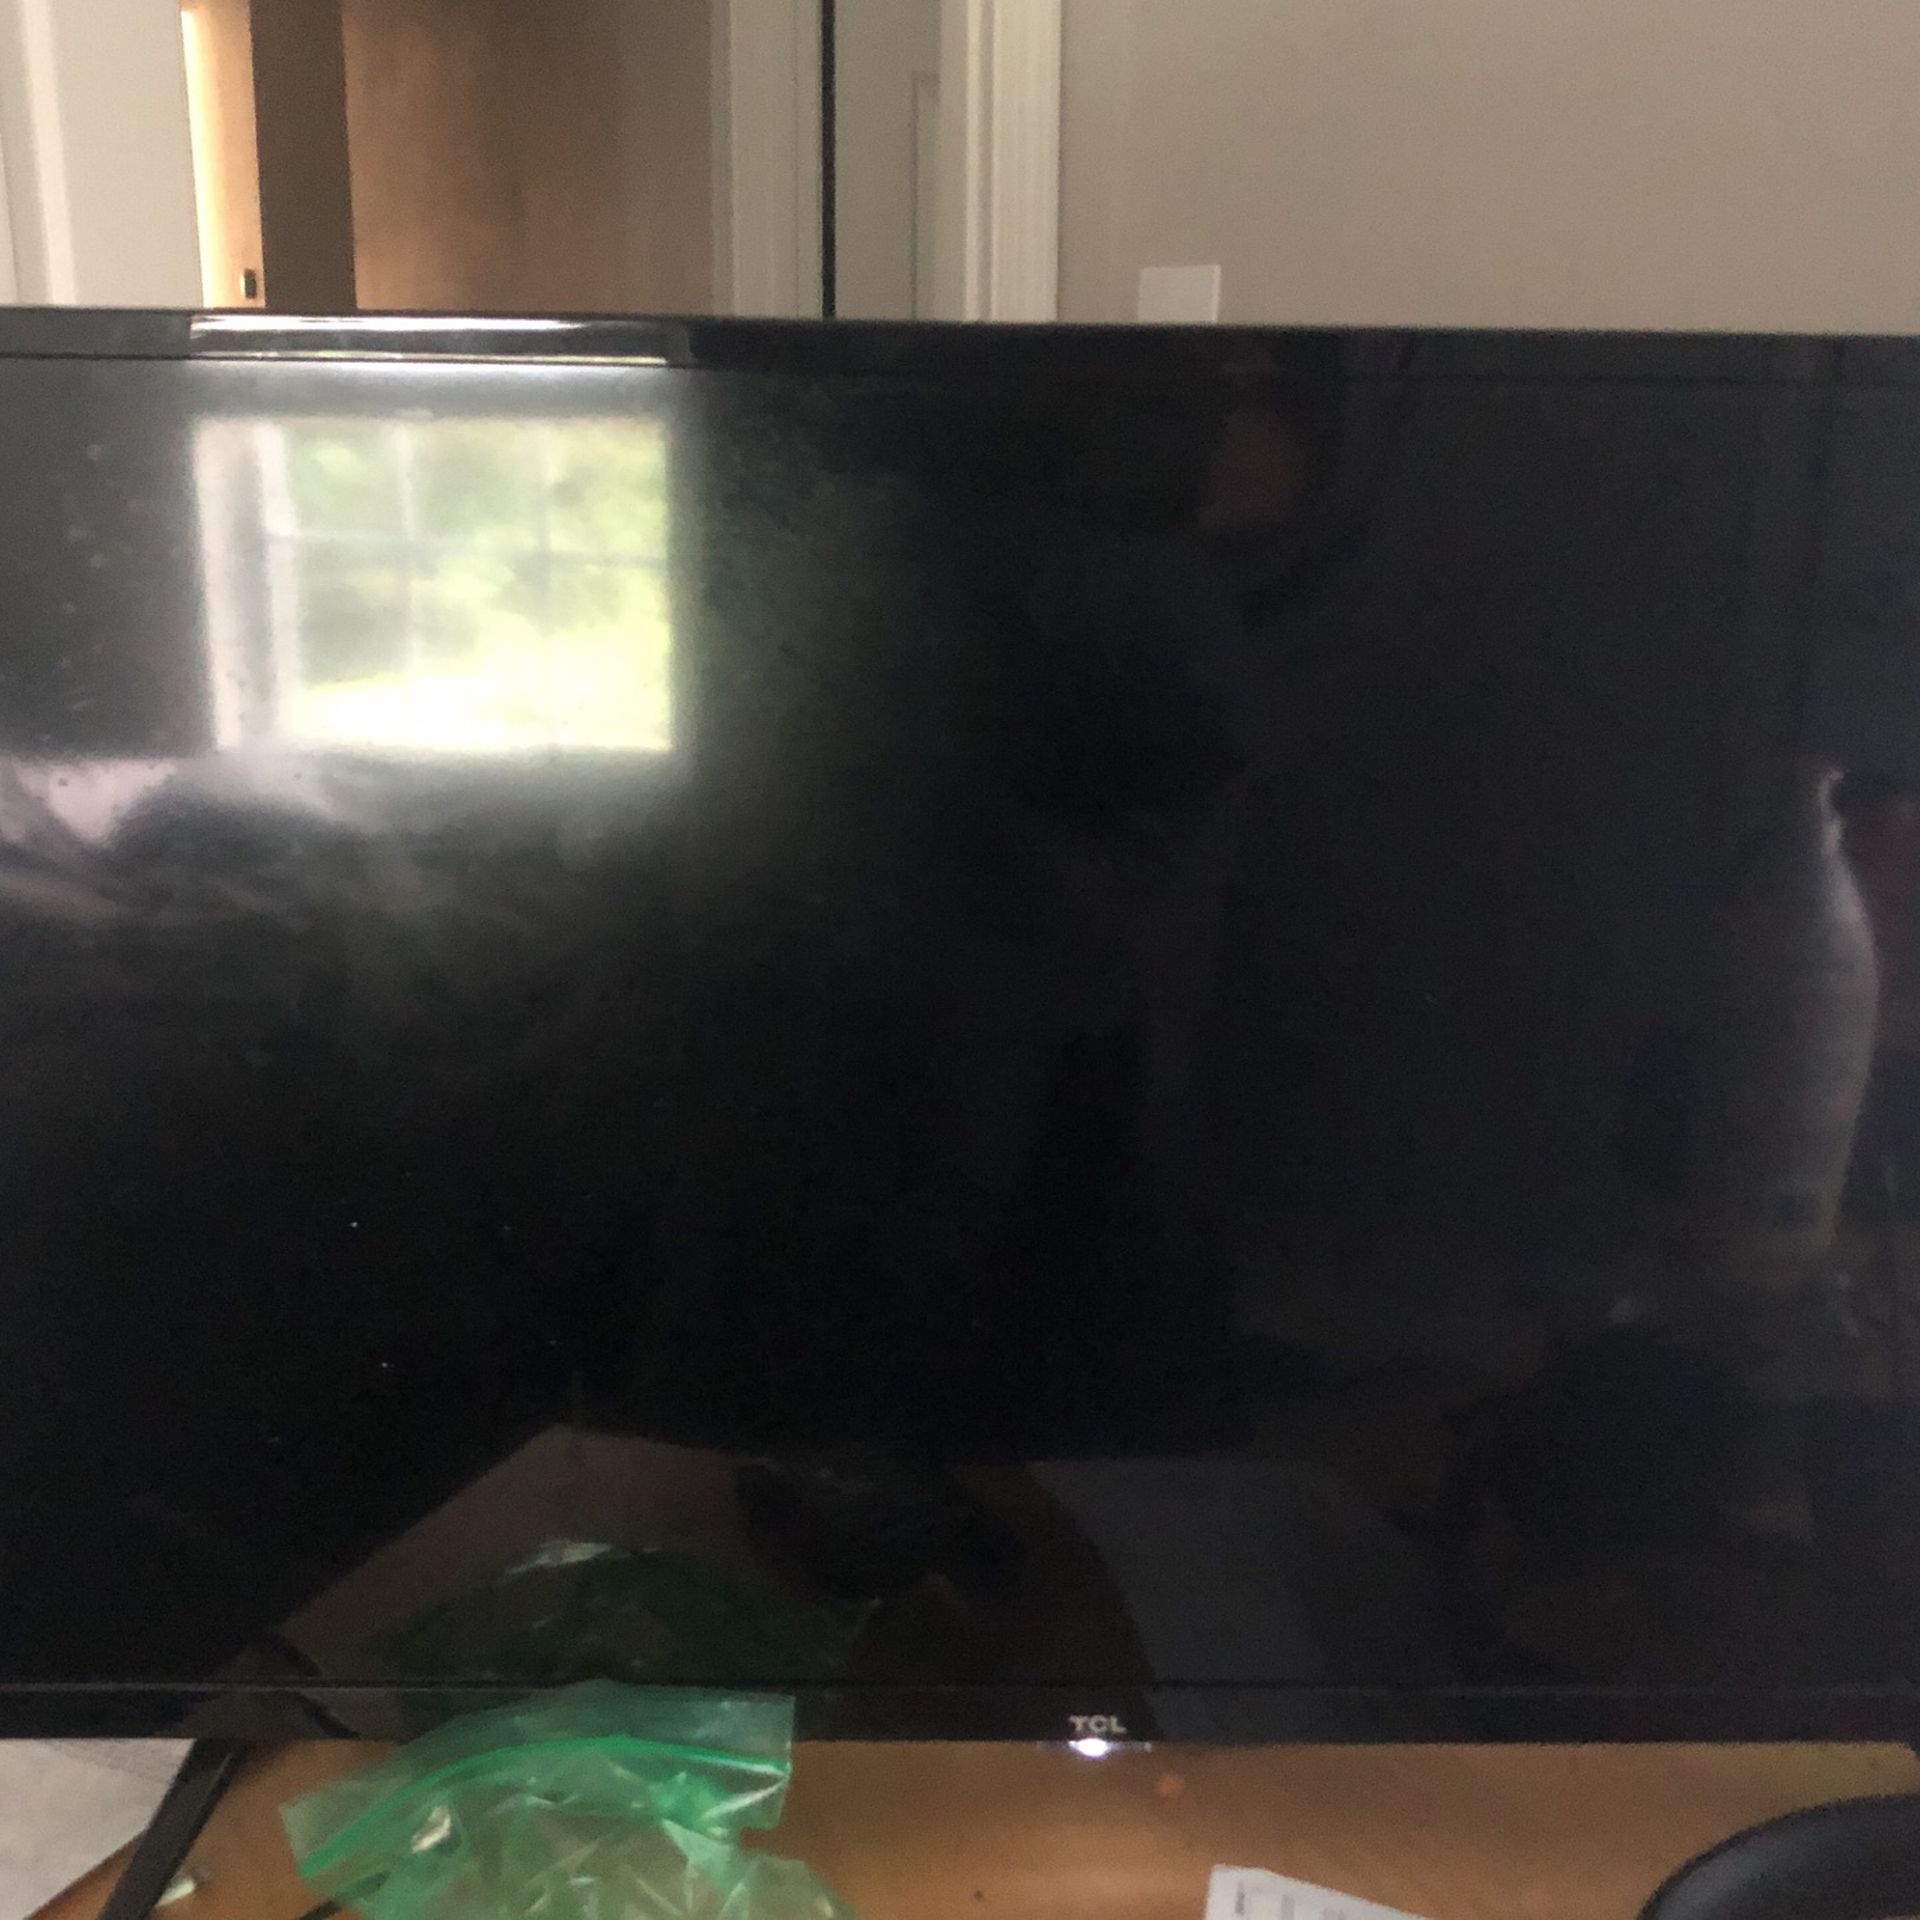 TCL Roku 34” TV with Remote